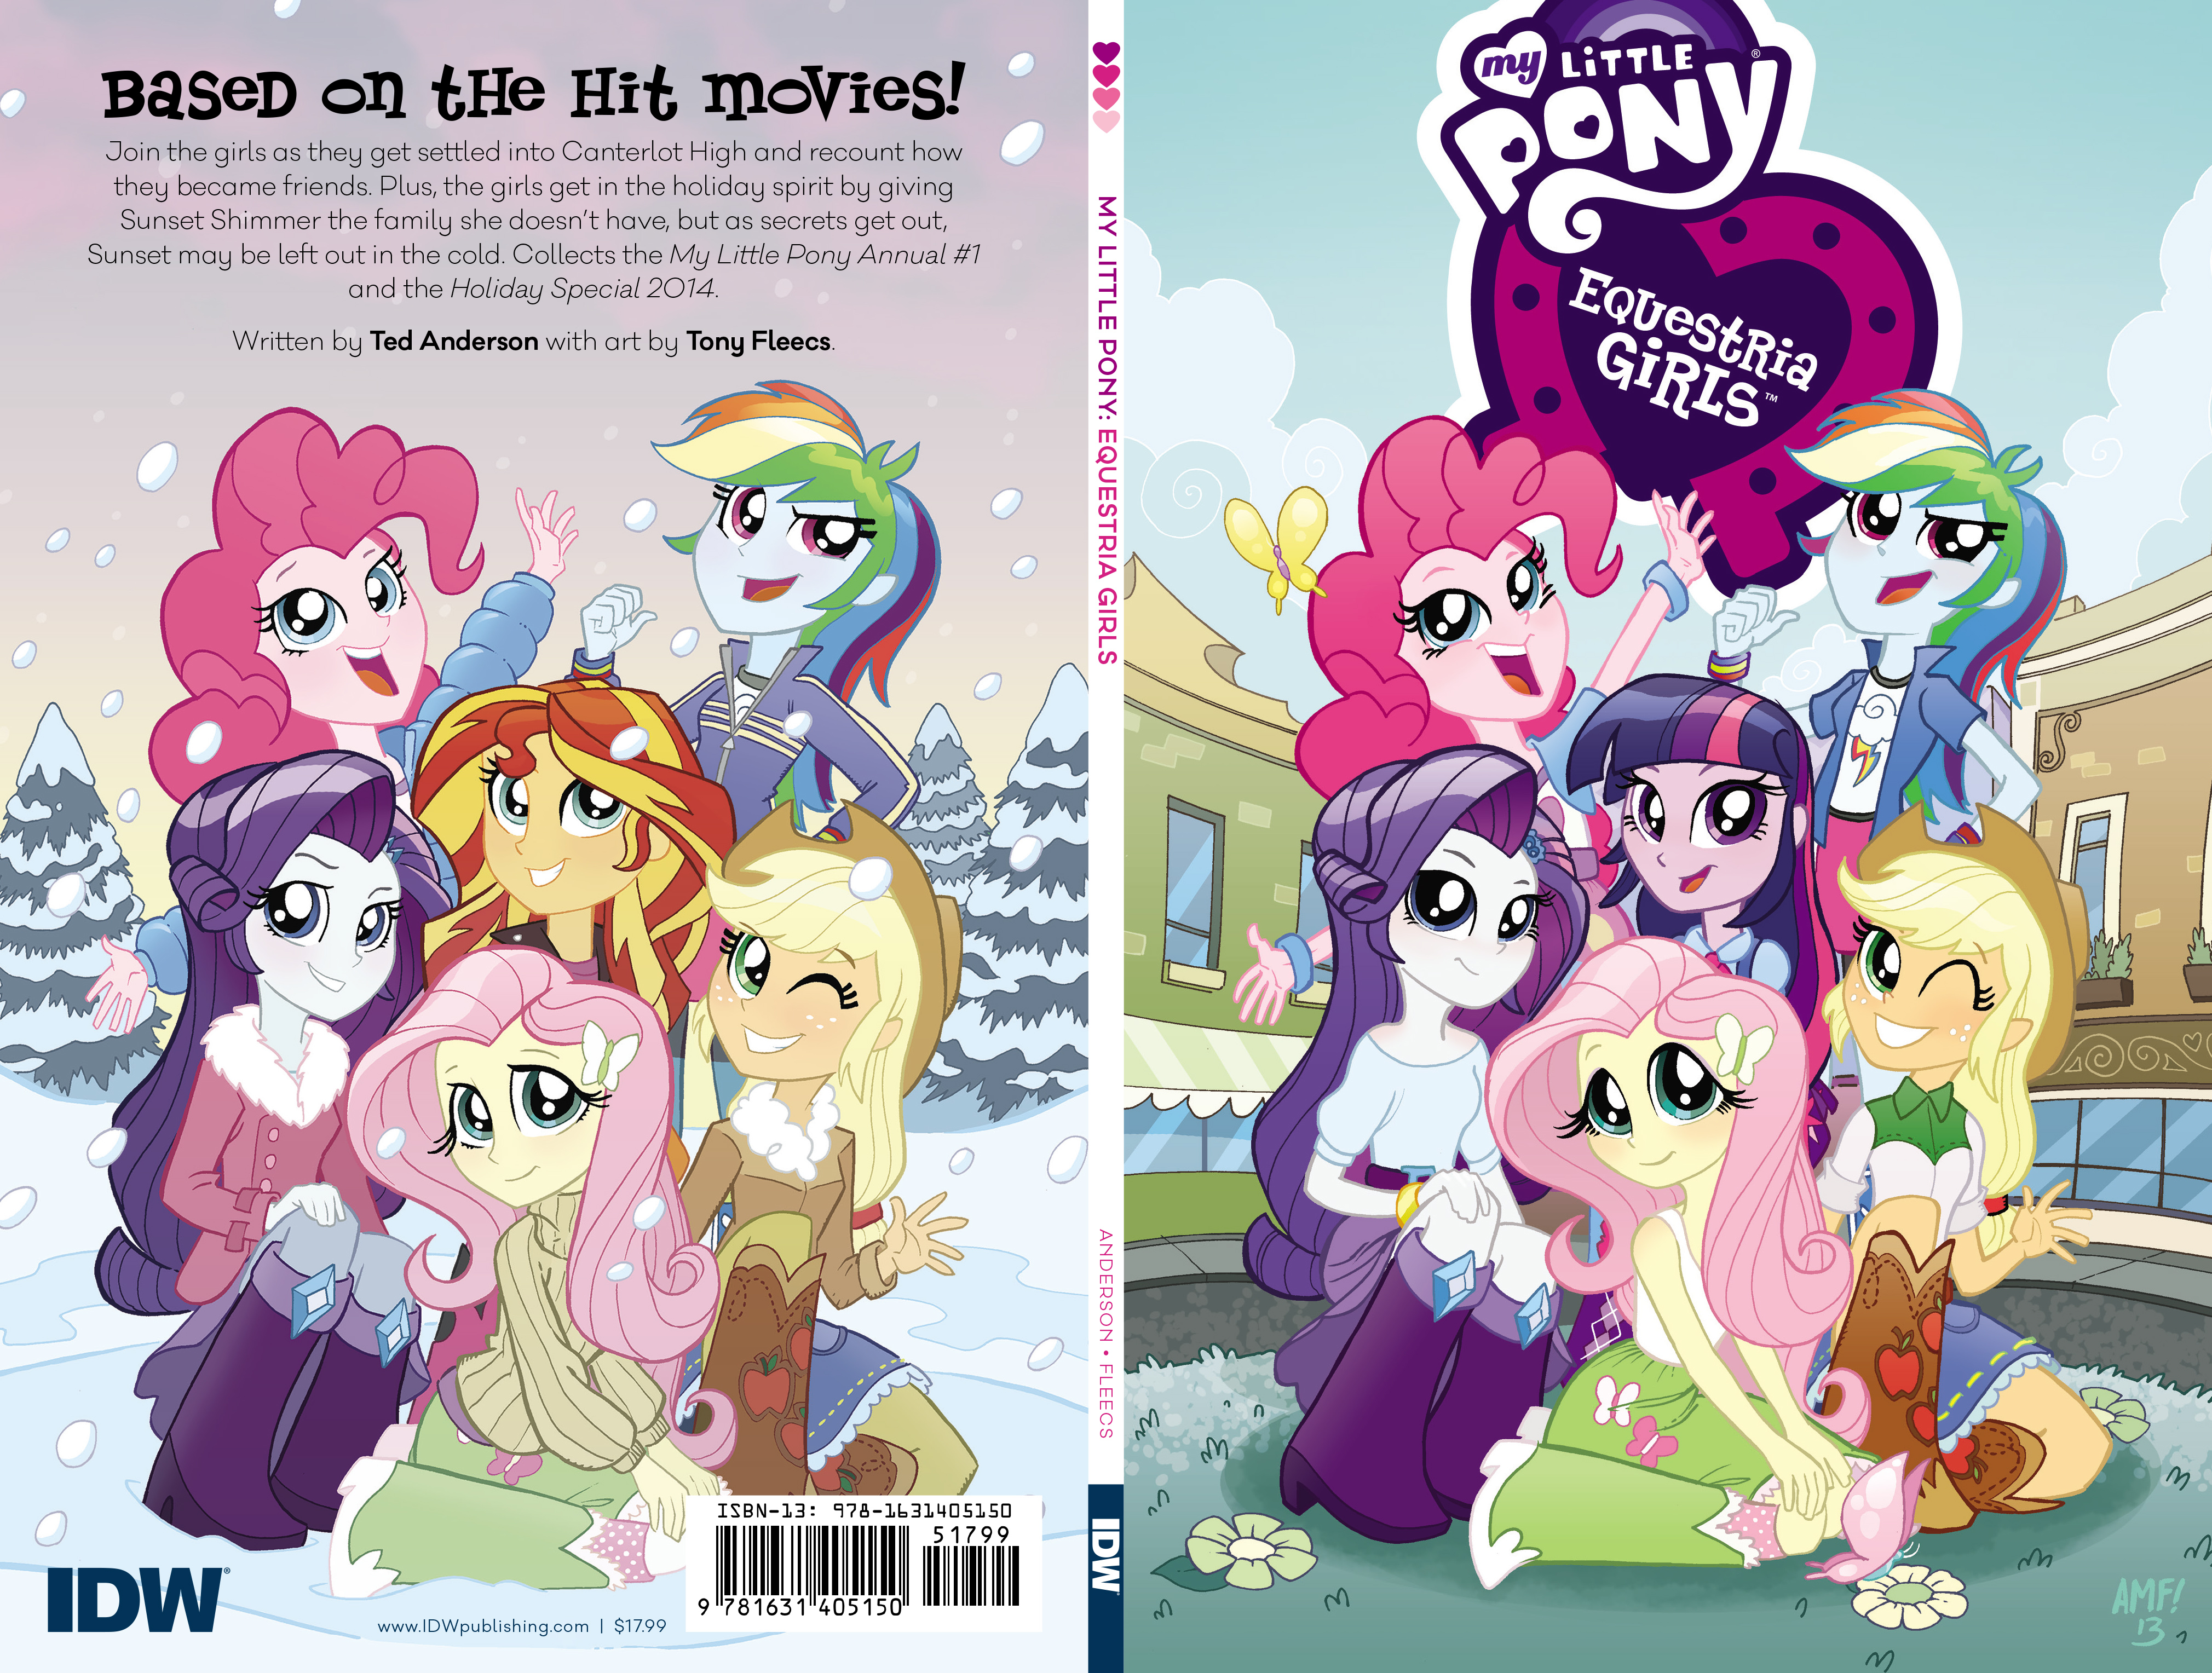 Read online My Little Pony: Equestria Girls comic -  Issue # TPB - 1